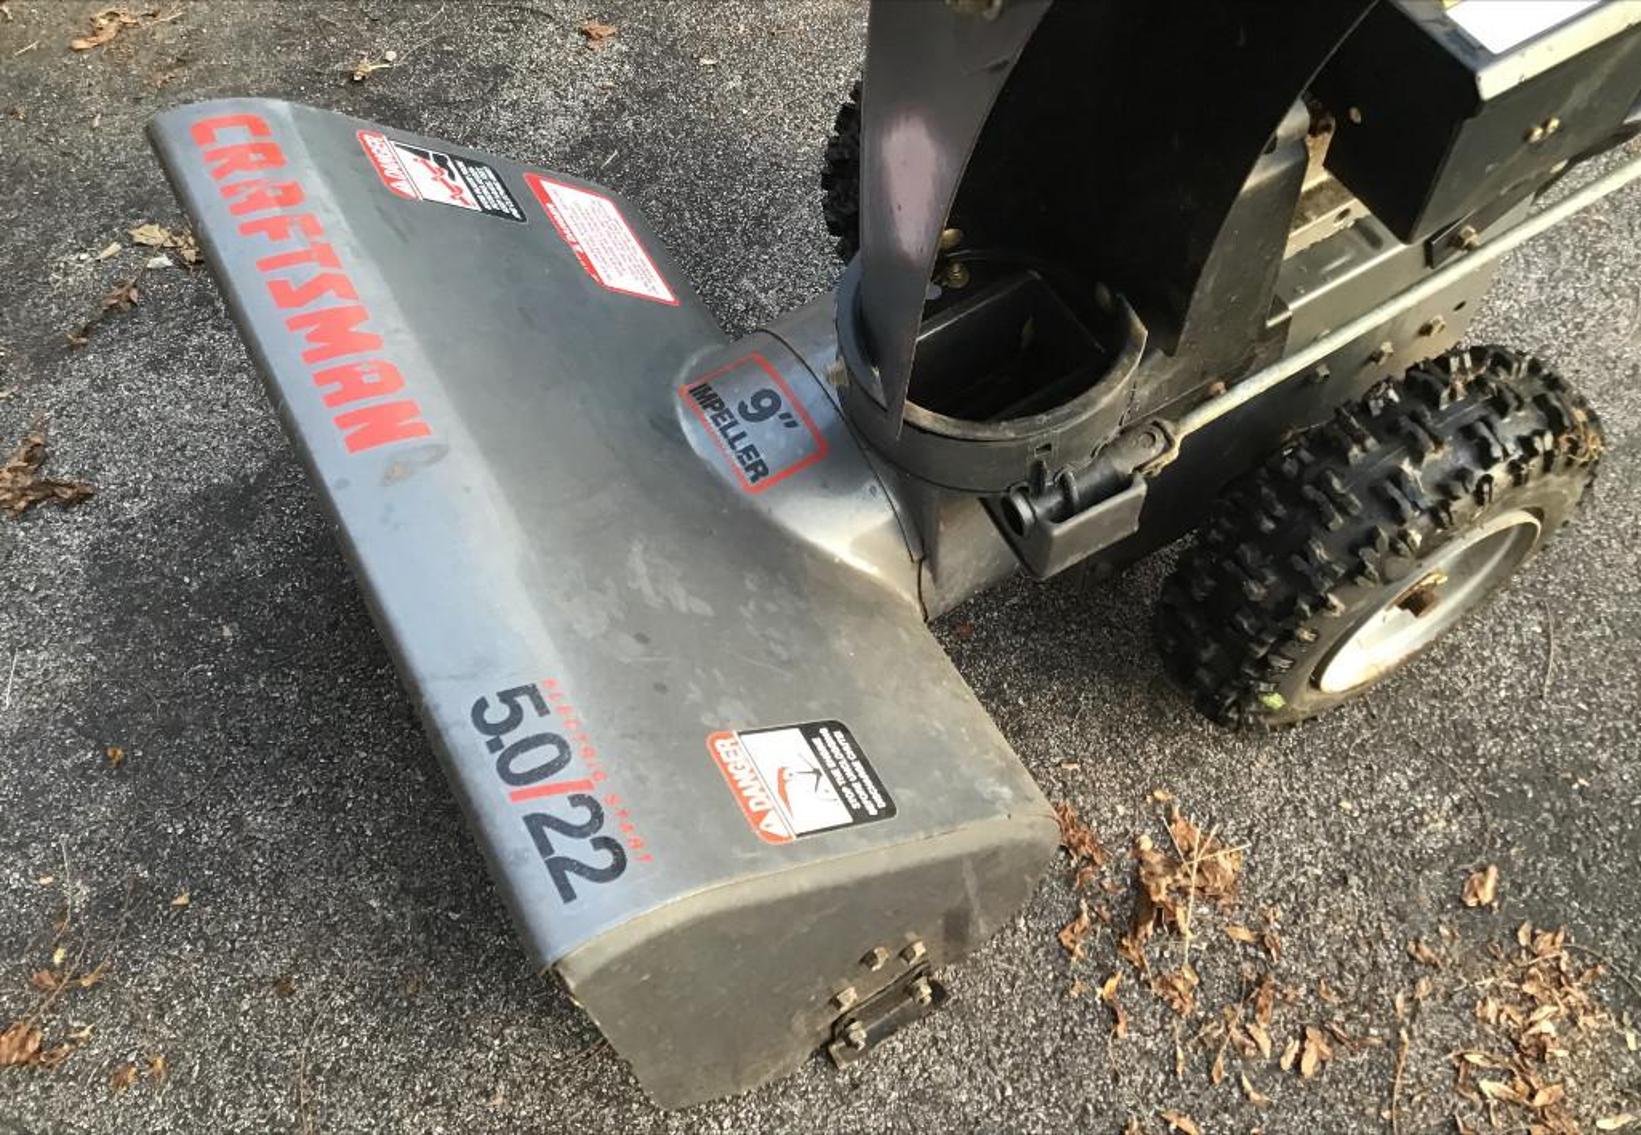 Image for Craftsman Snow Blower